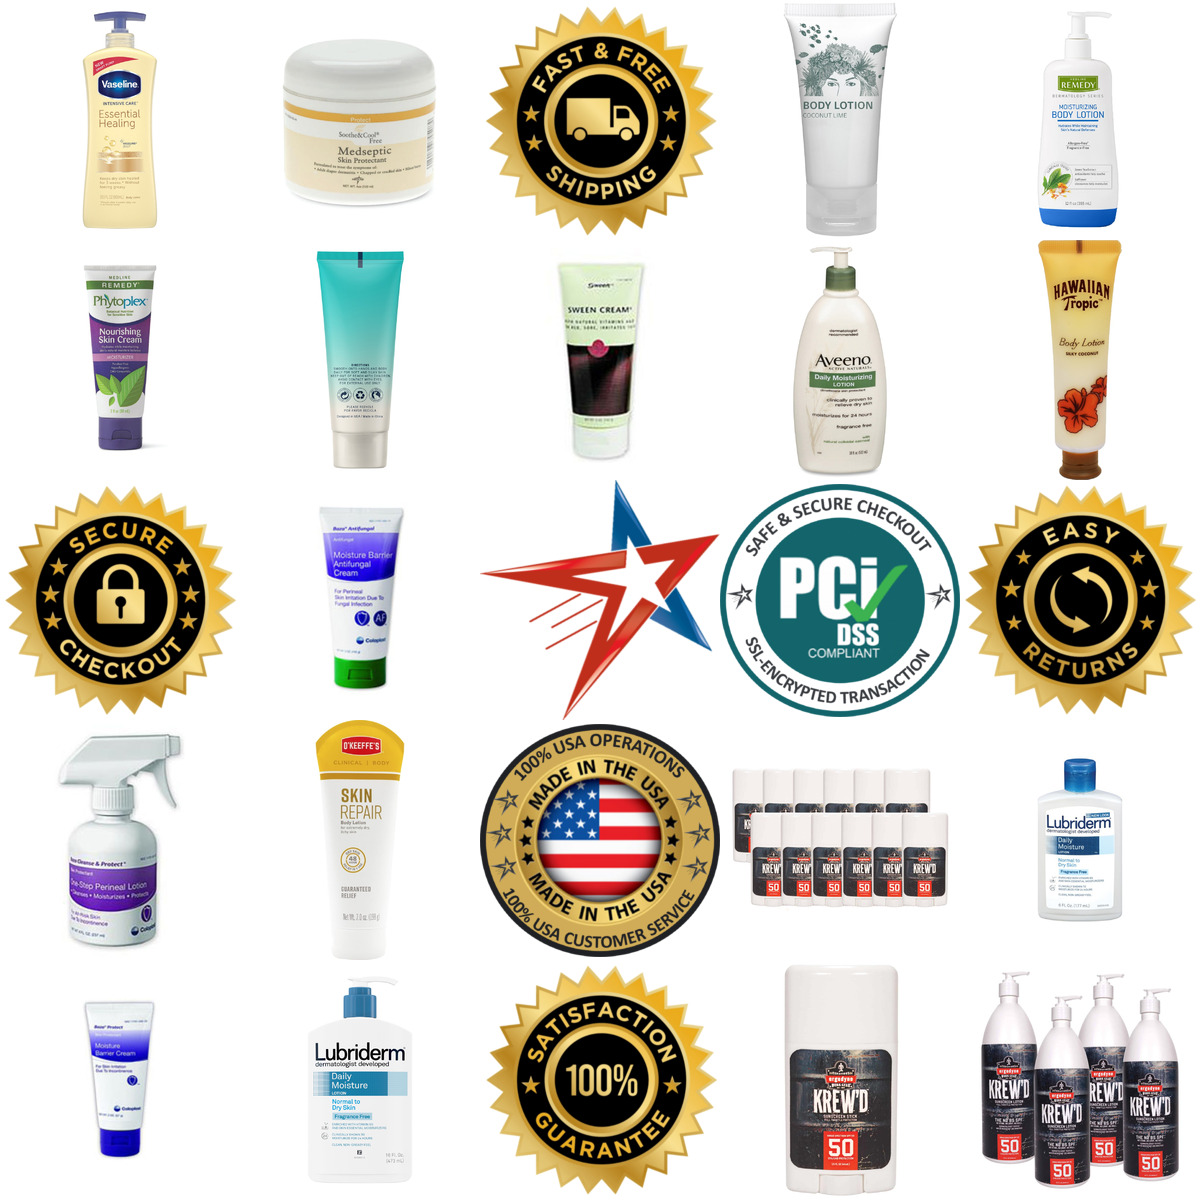 A selection of Lotion products on GoVets